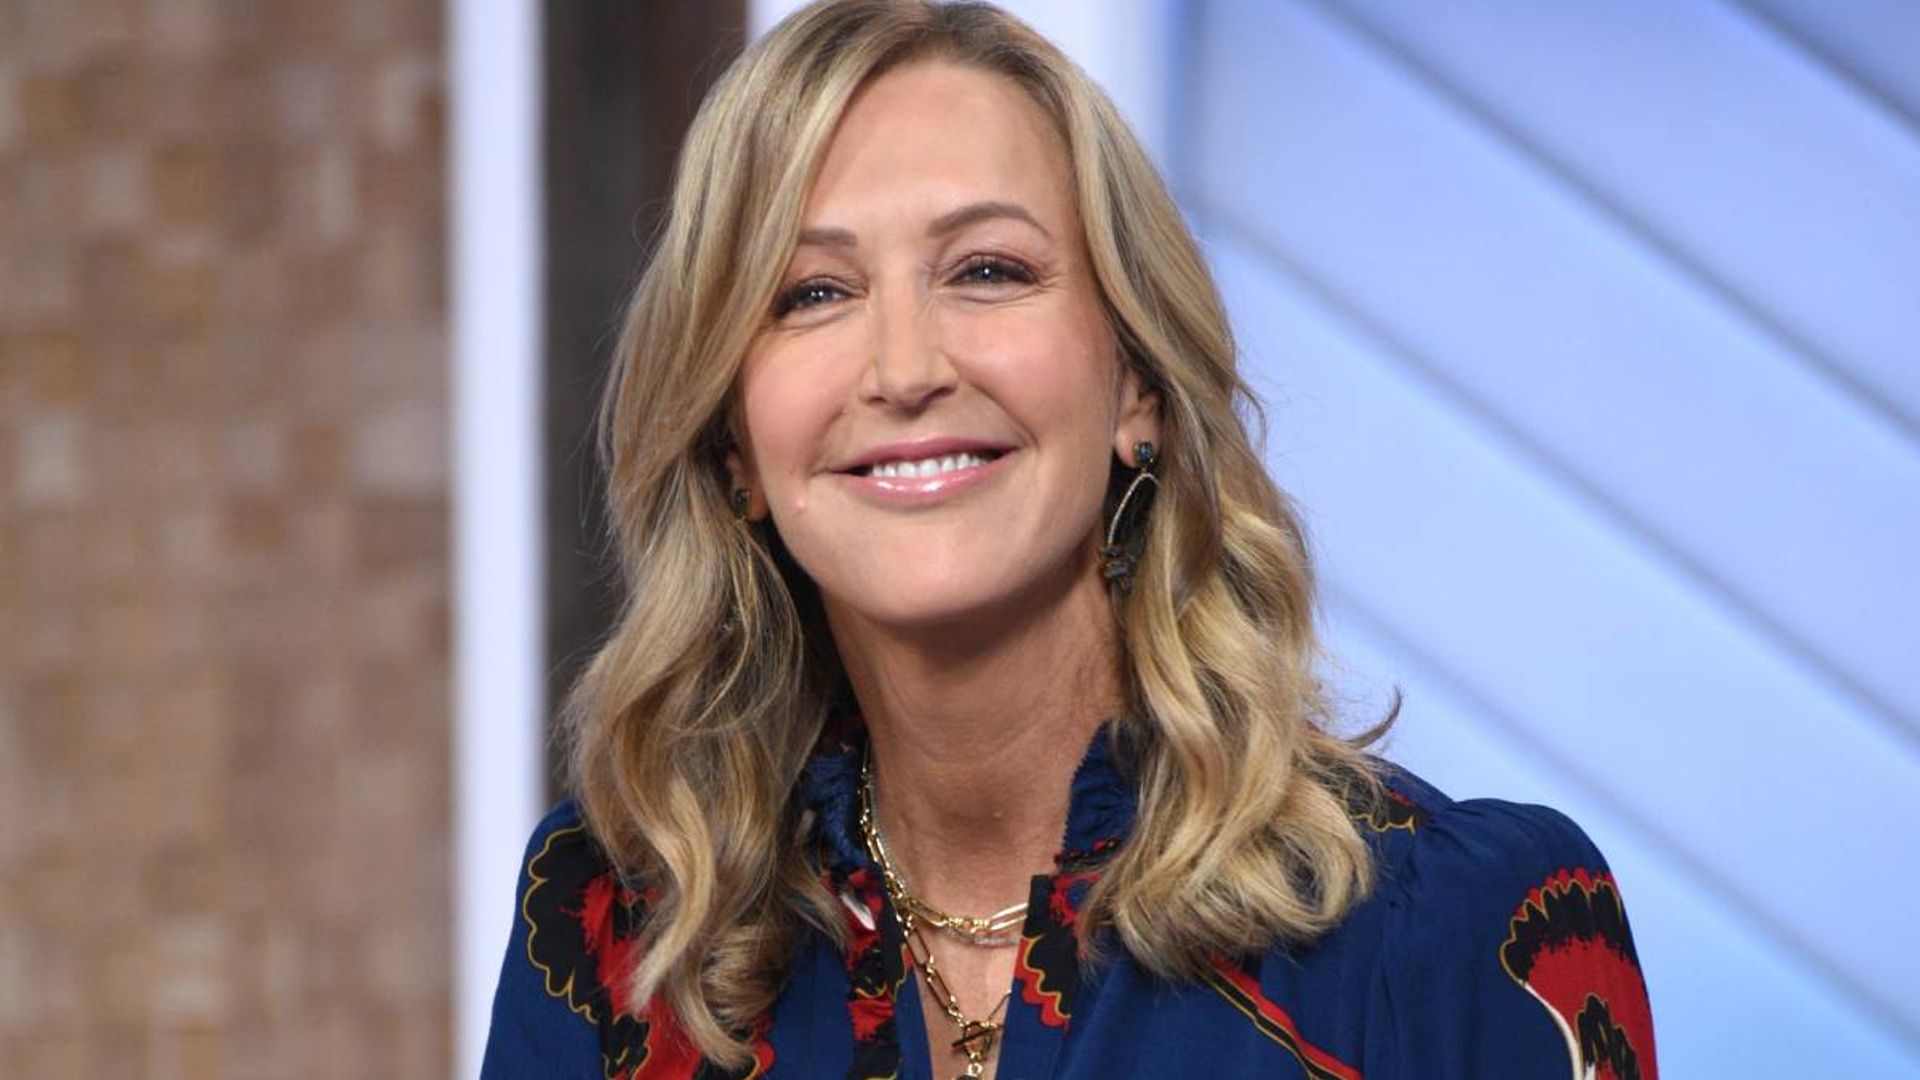 GMA's Lara Spencer delights fans with exclusive behindthescenes